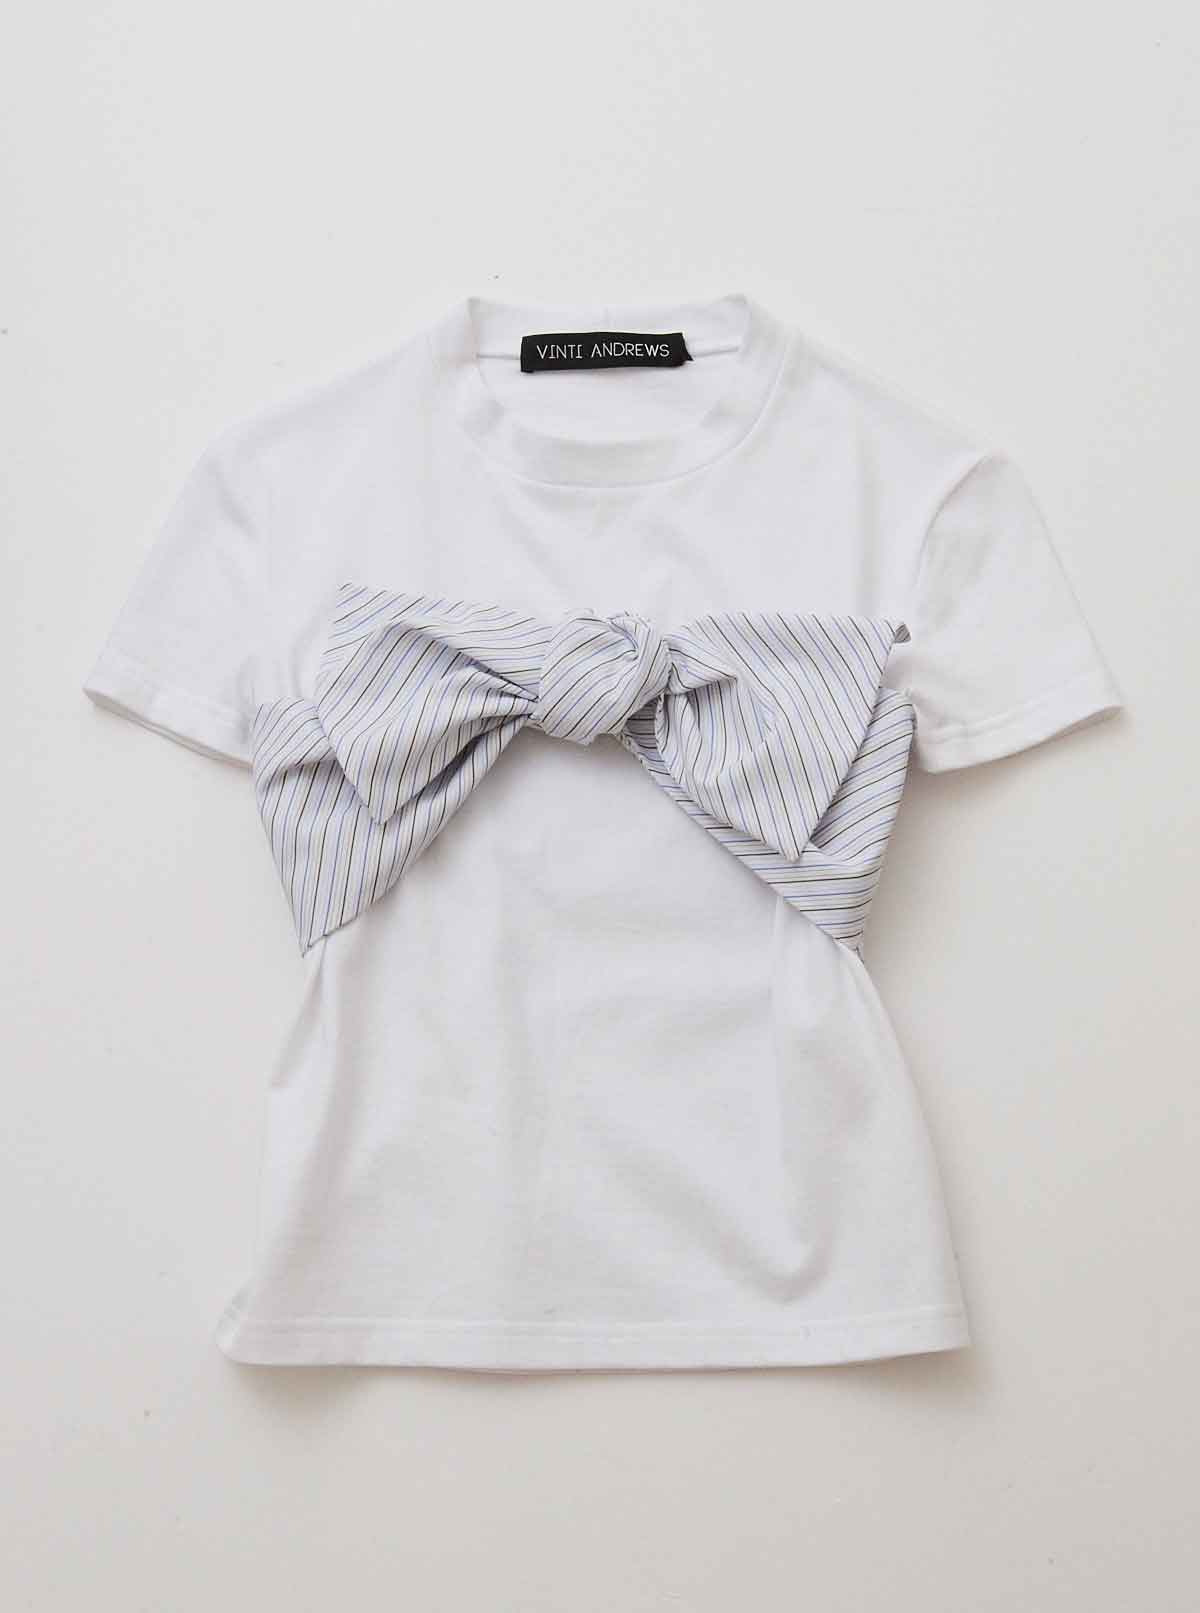 Vinti Andrews Bustier Bow T-Shirt